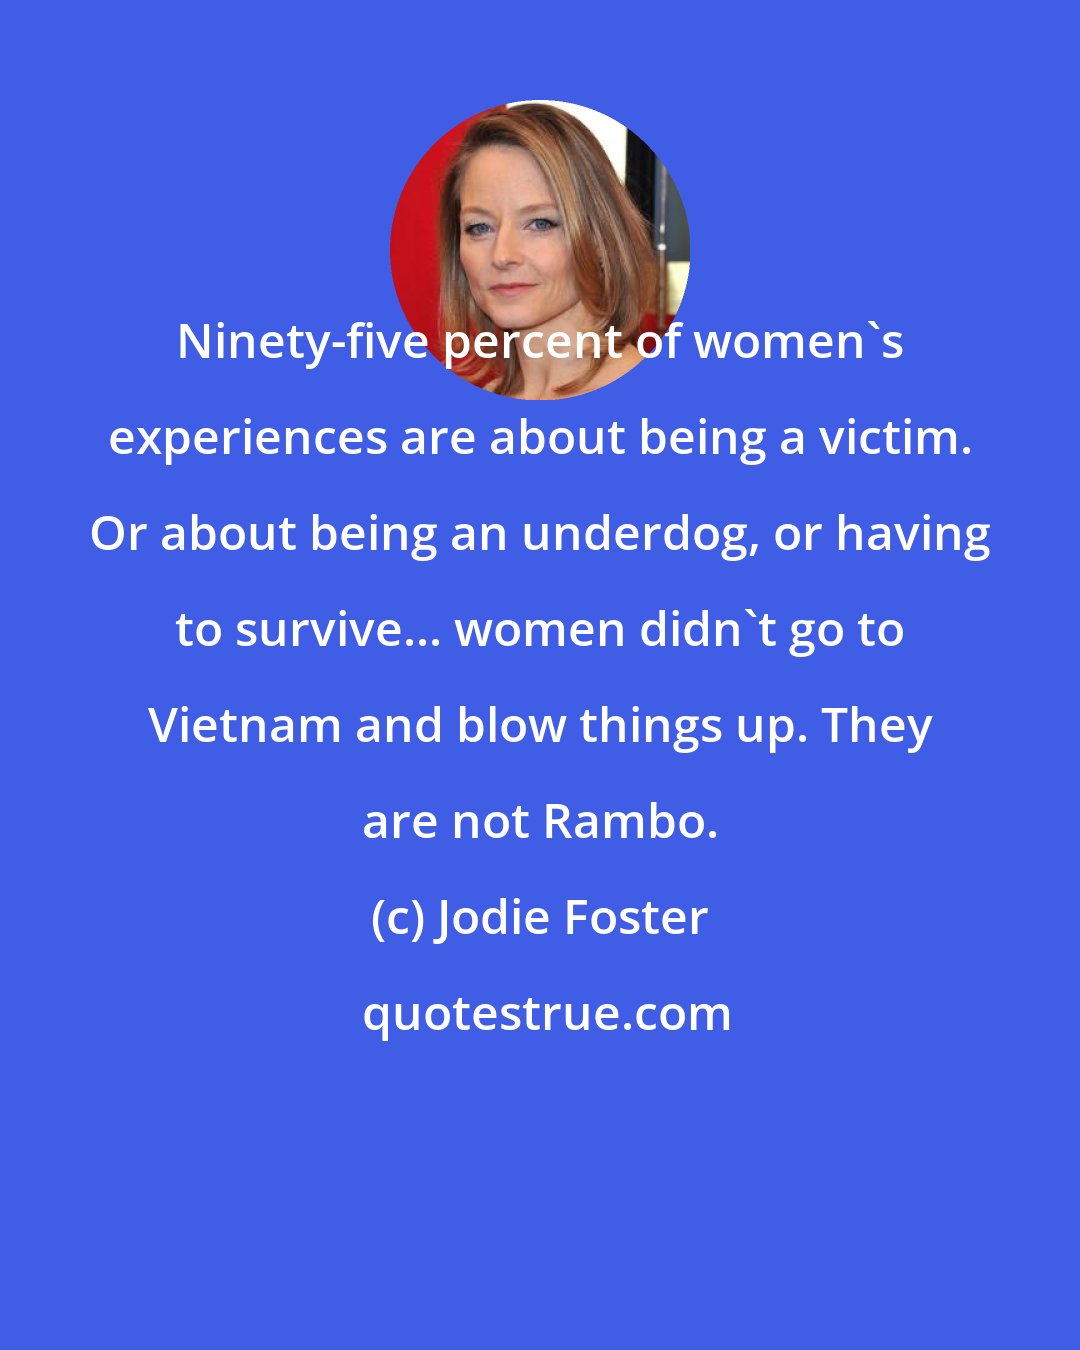 Jodie Foster: Ninety-five percent of women's experiences are about being a victim. Or about being an underdog, or having to survive... women didn't go to Vietnam and blow things up. They are not Rambo.